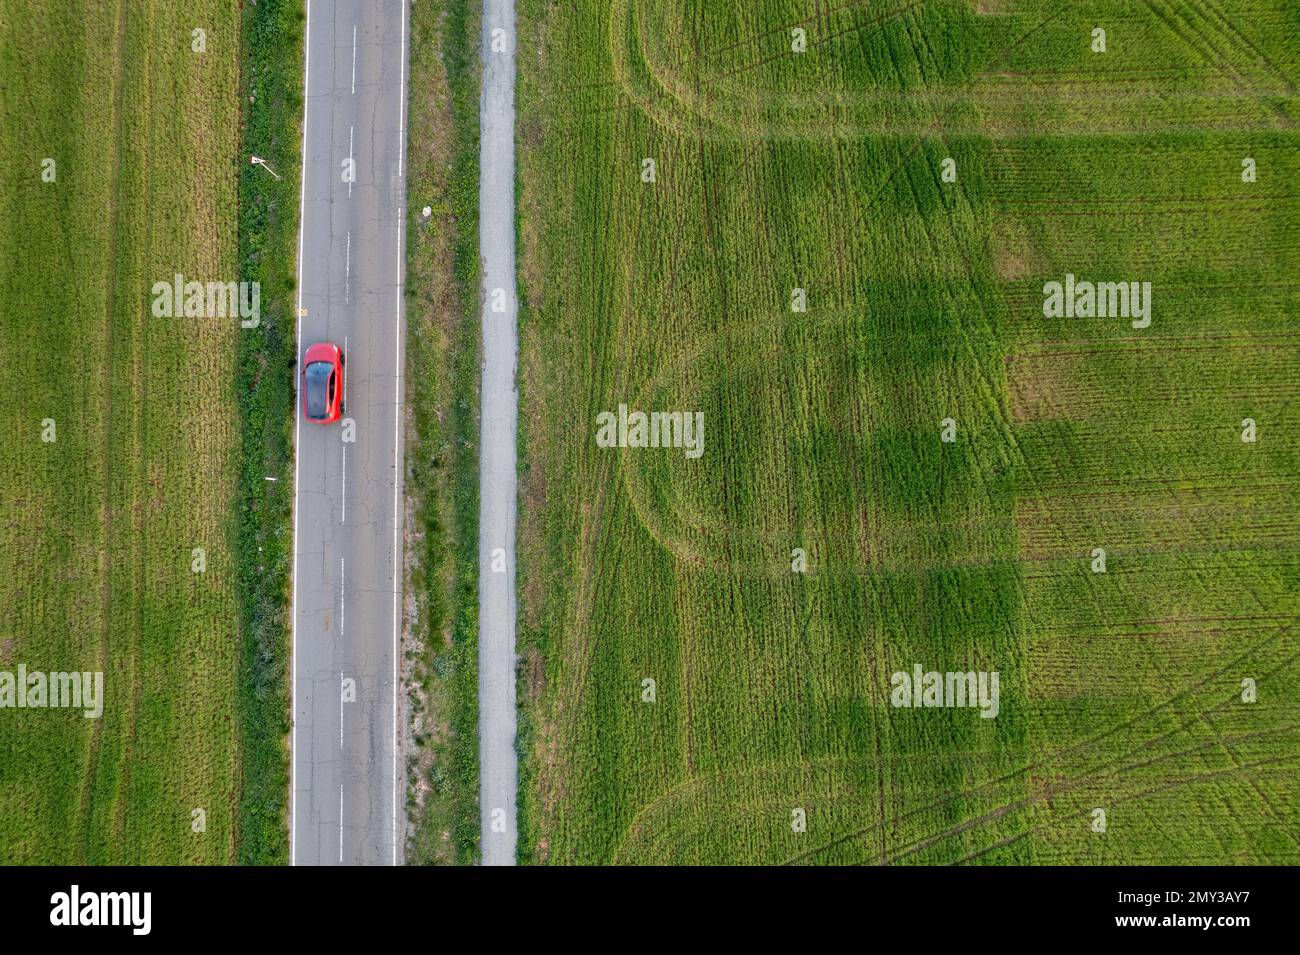 Drone aerial of Red car traveling on a scenic rural road. Countryside with green agriculture field. Cyprus Stock Photo